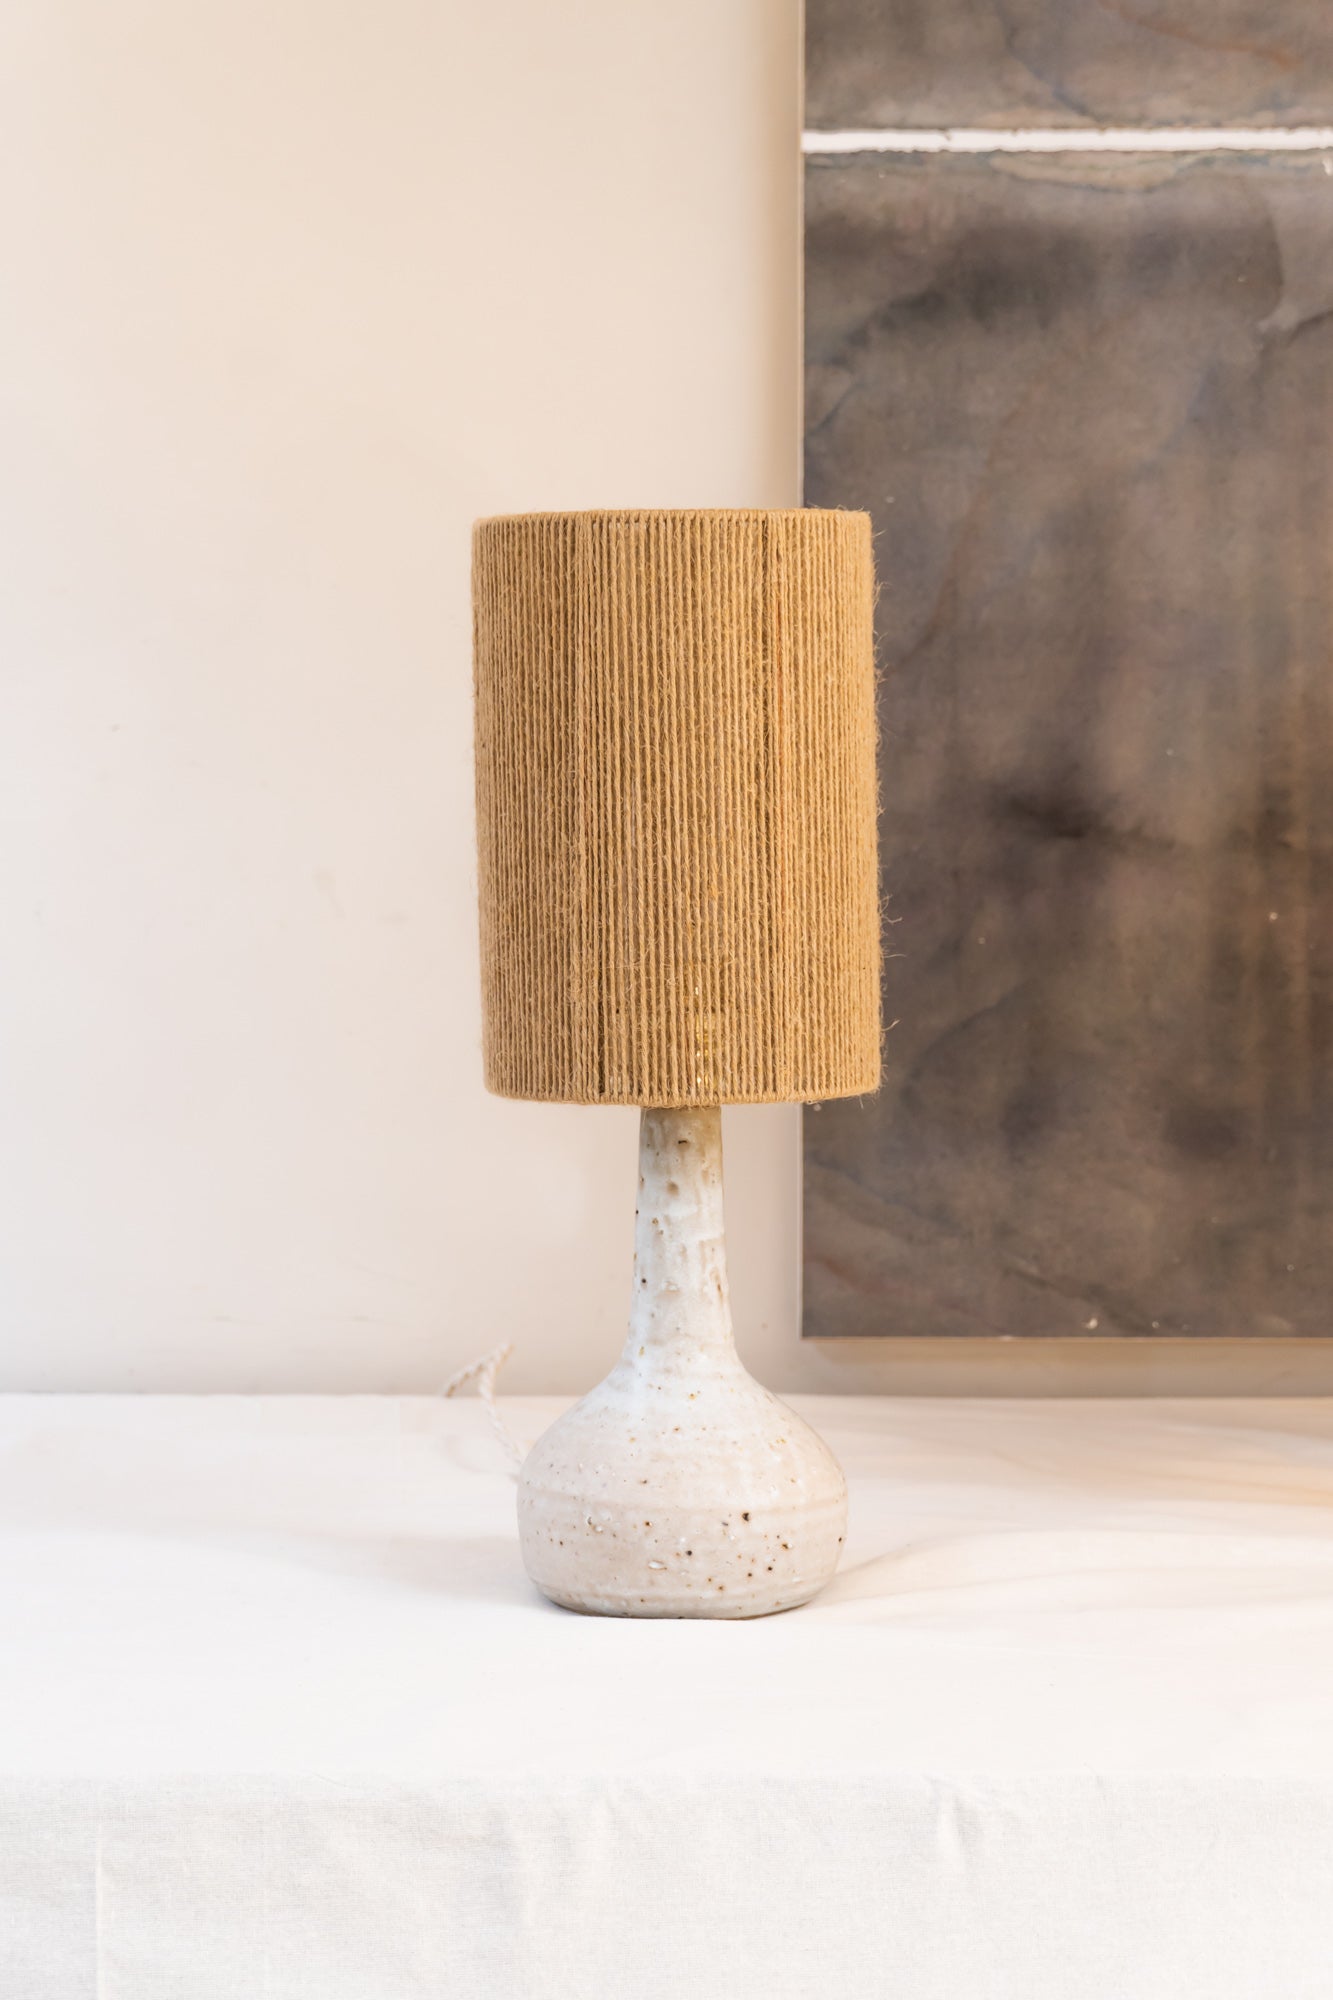 Small Lune lamp by Grès Ceramics - handmade ceramic smooth stone table lamp with jute rope shade